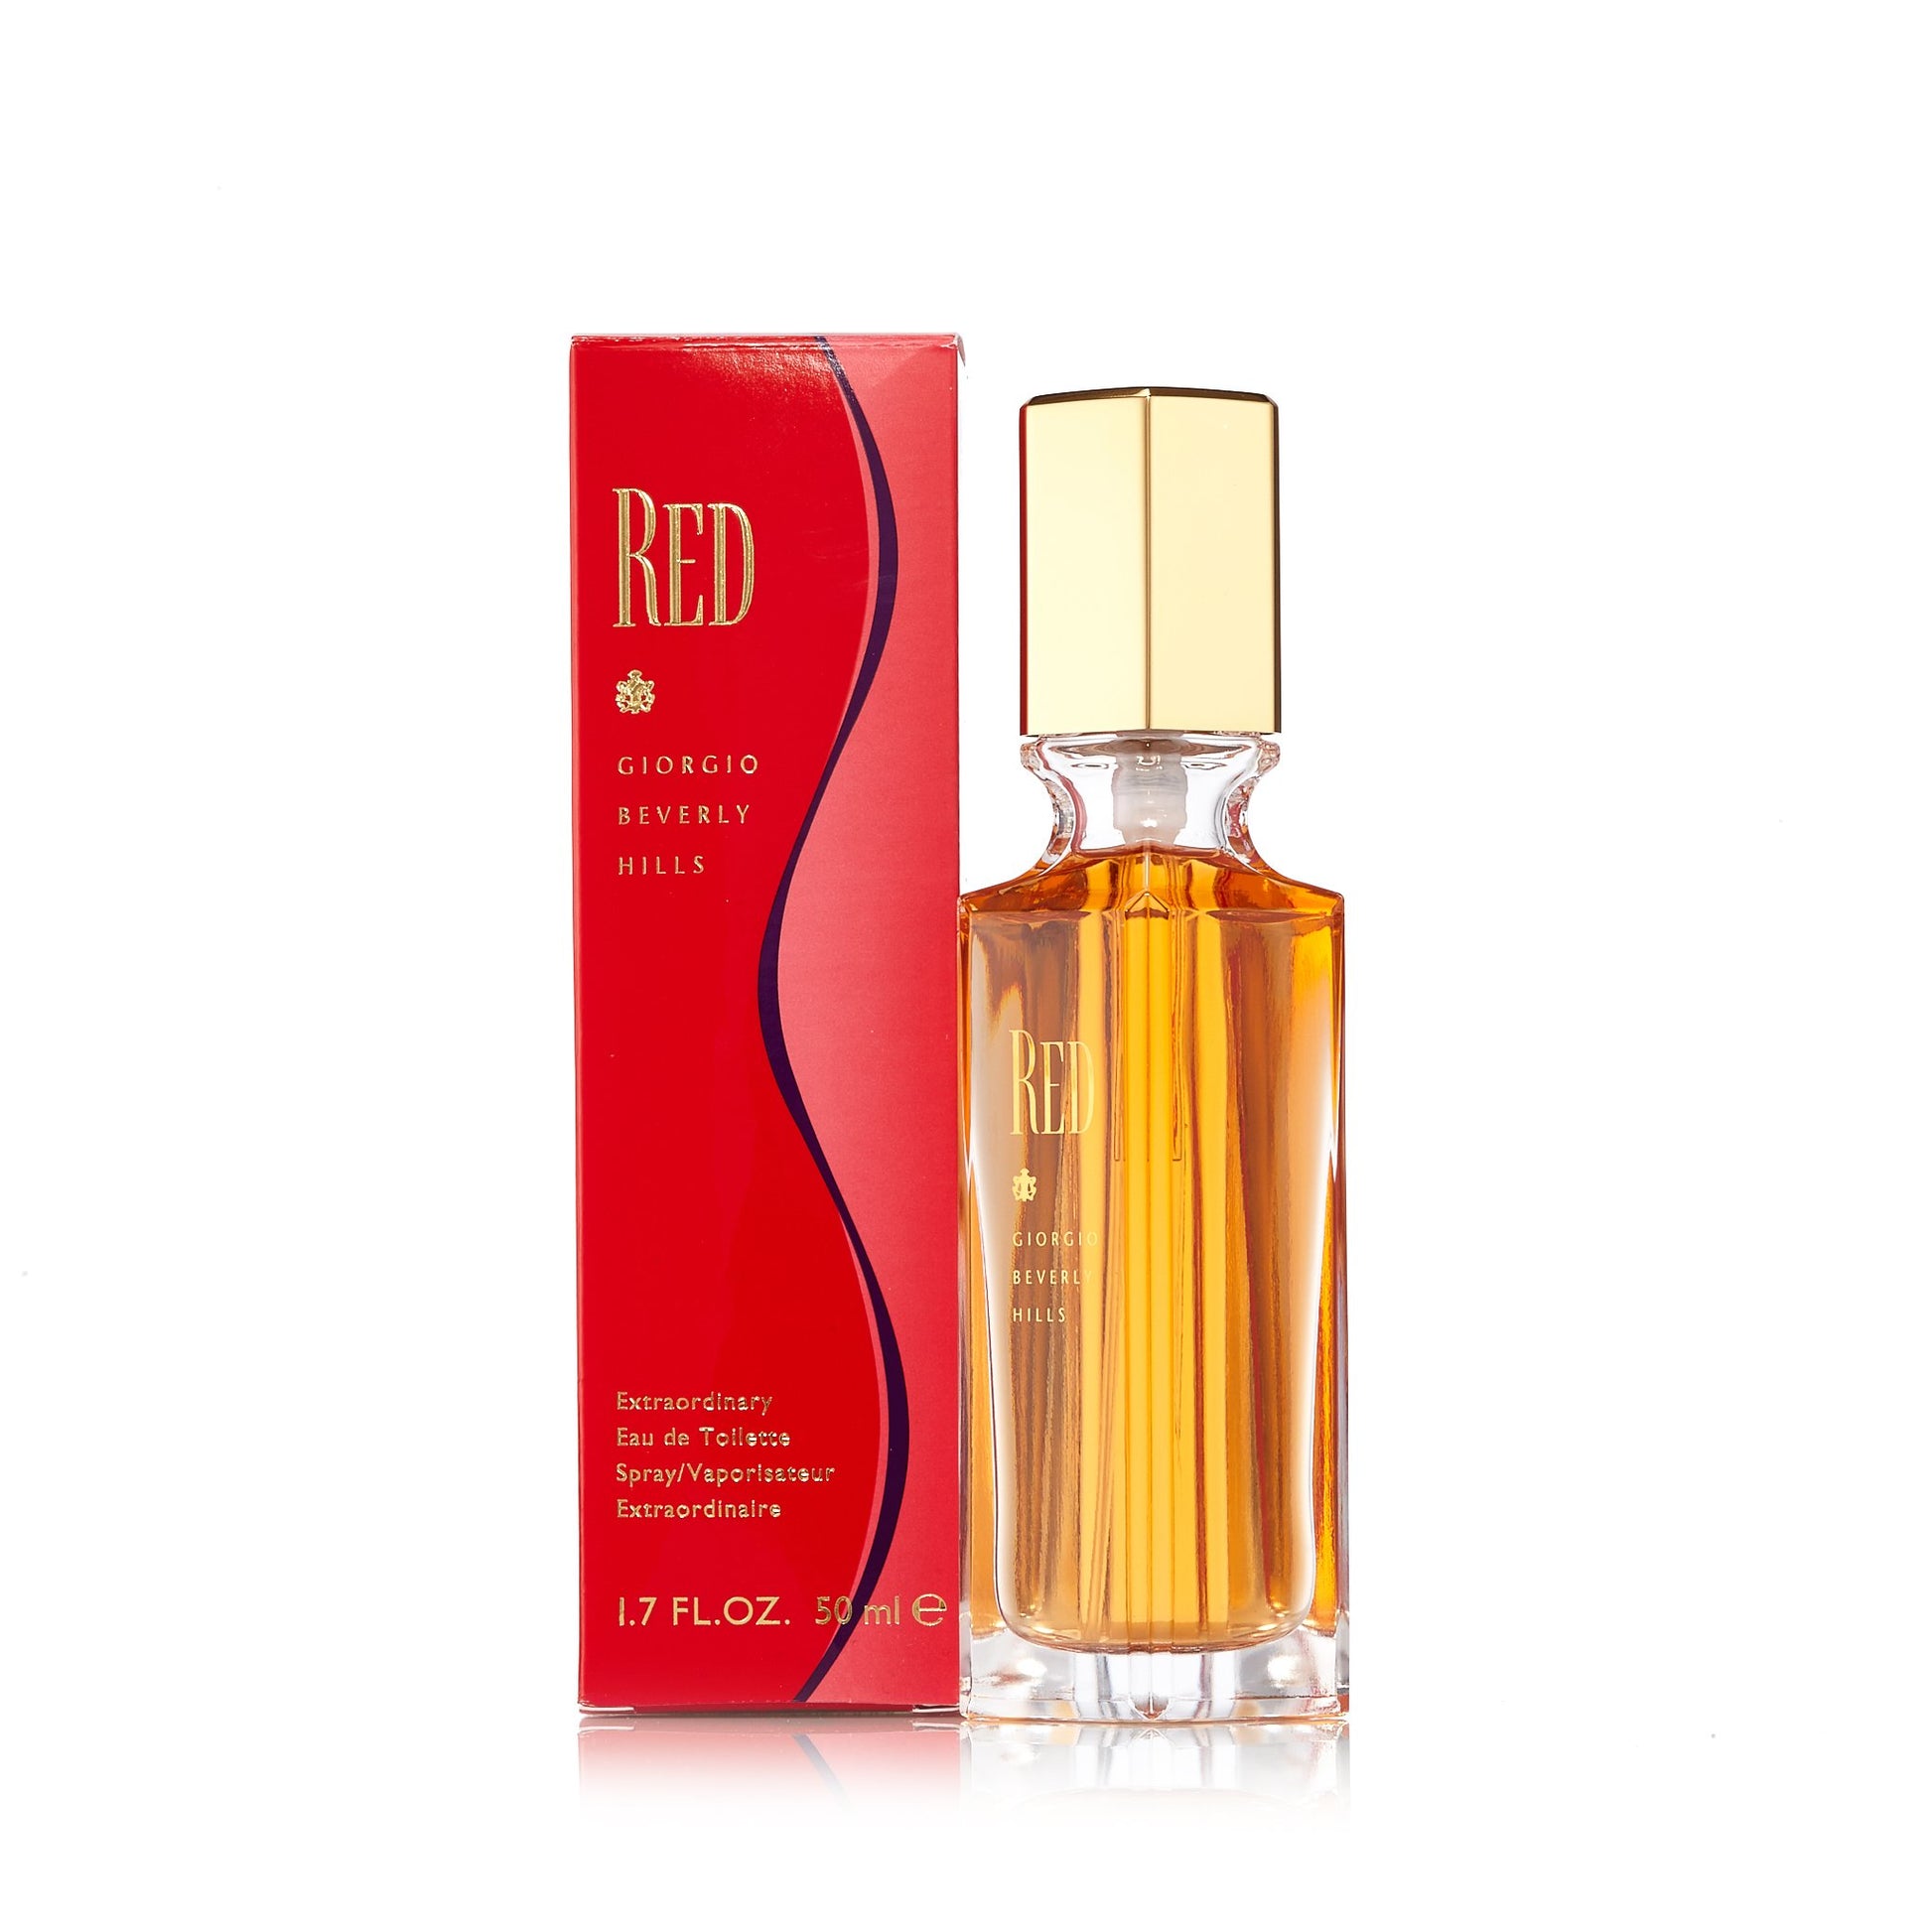 Red Giorgio Eau de Toilette Spray for Women by Beverly Hills, Product image 3